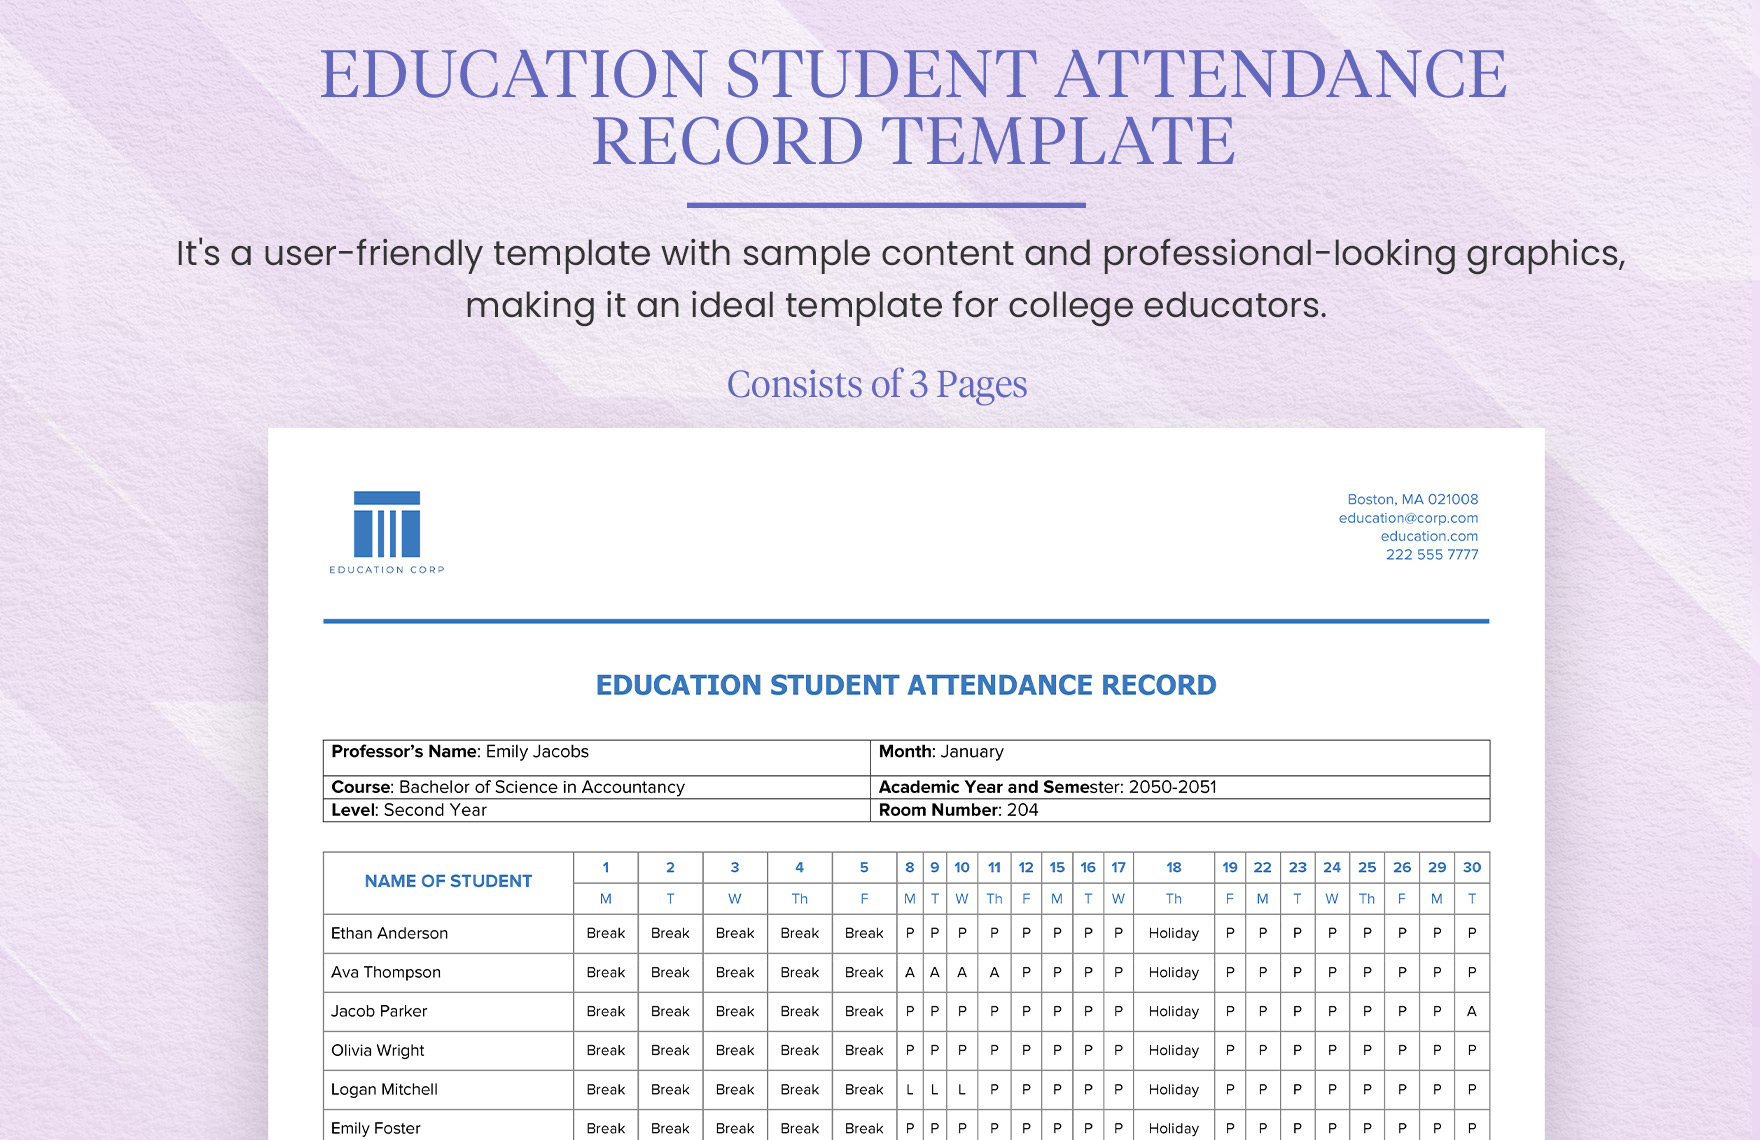 Education Student Attendance Record Template in Word, Google Docs, PDF